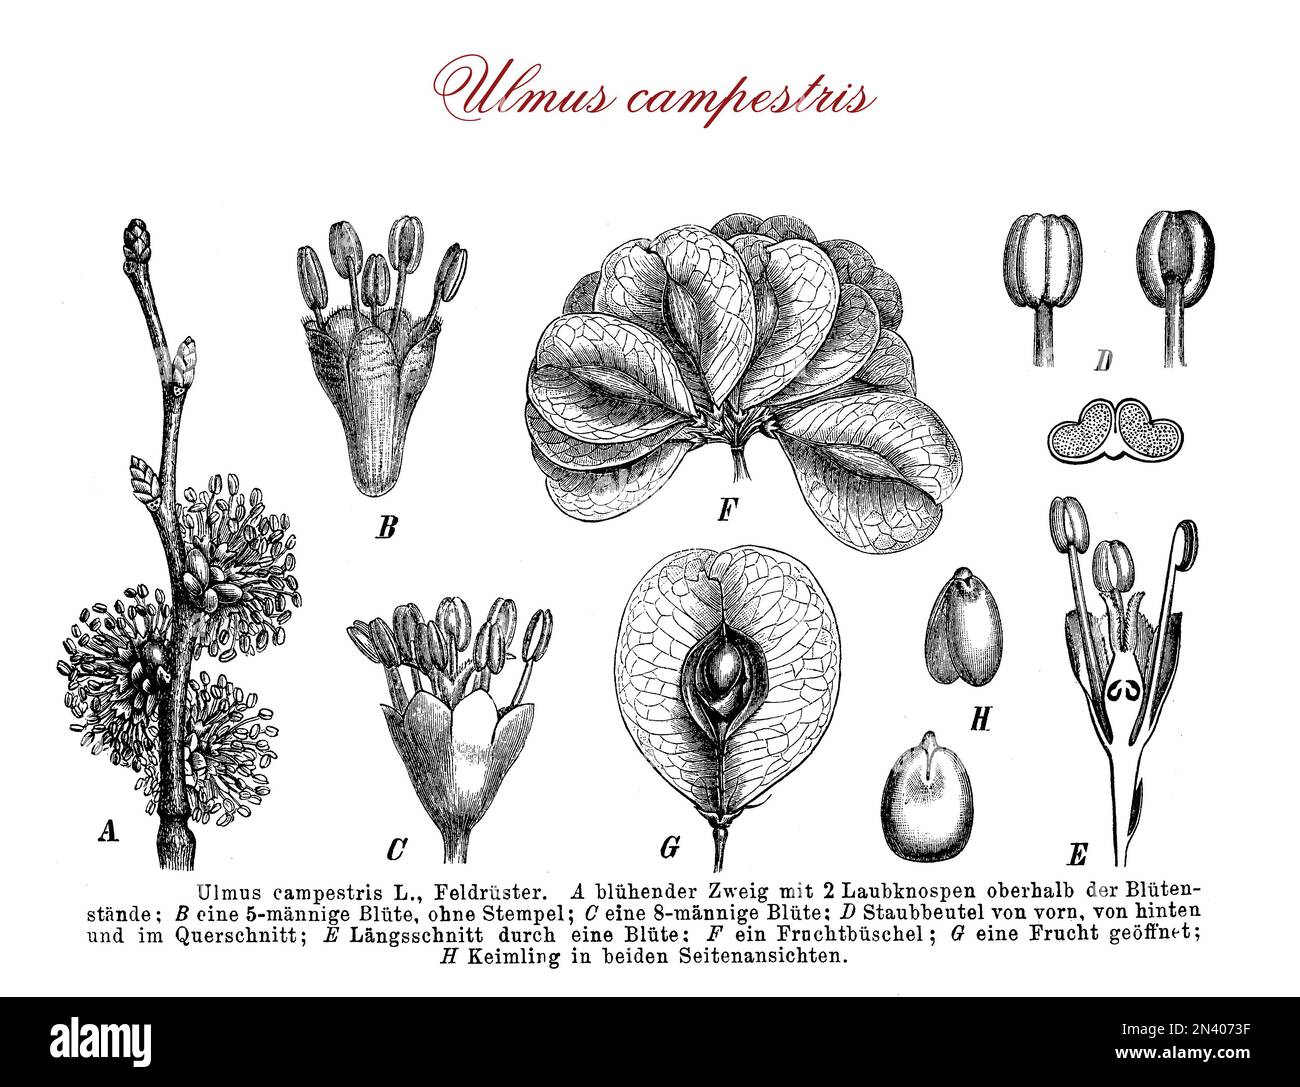 Vintage engraving of Elm tree botanical morphology: deciduous flowering tree with apetalous flowers wind-pollinated and round wind-dispersed very light samara fruits. Spontanous in forest and landscapes, elm is cultivated as ornamental plant in streets, gardens and parks. Stock Photo